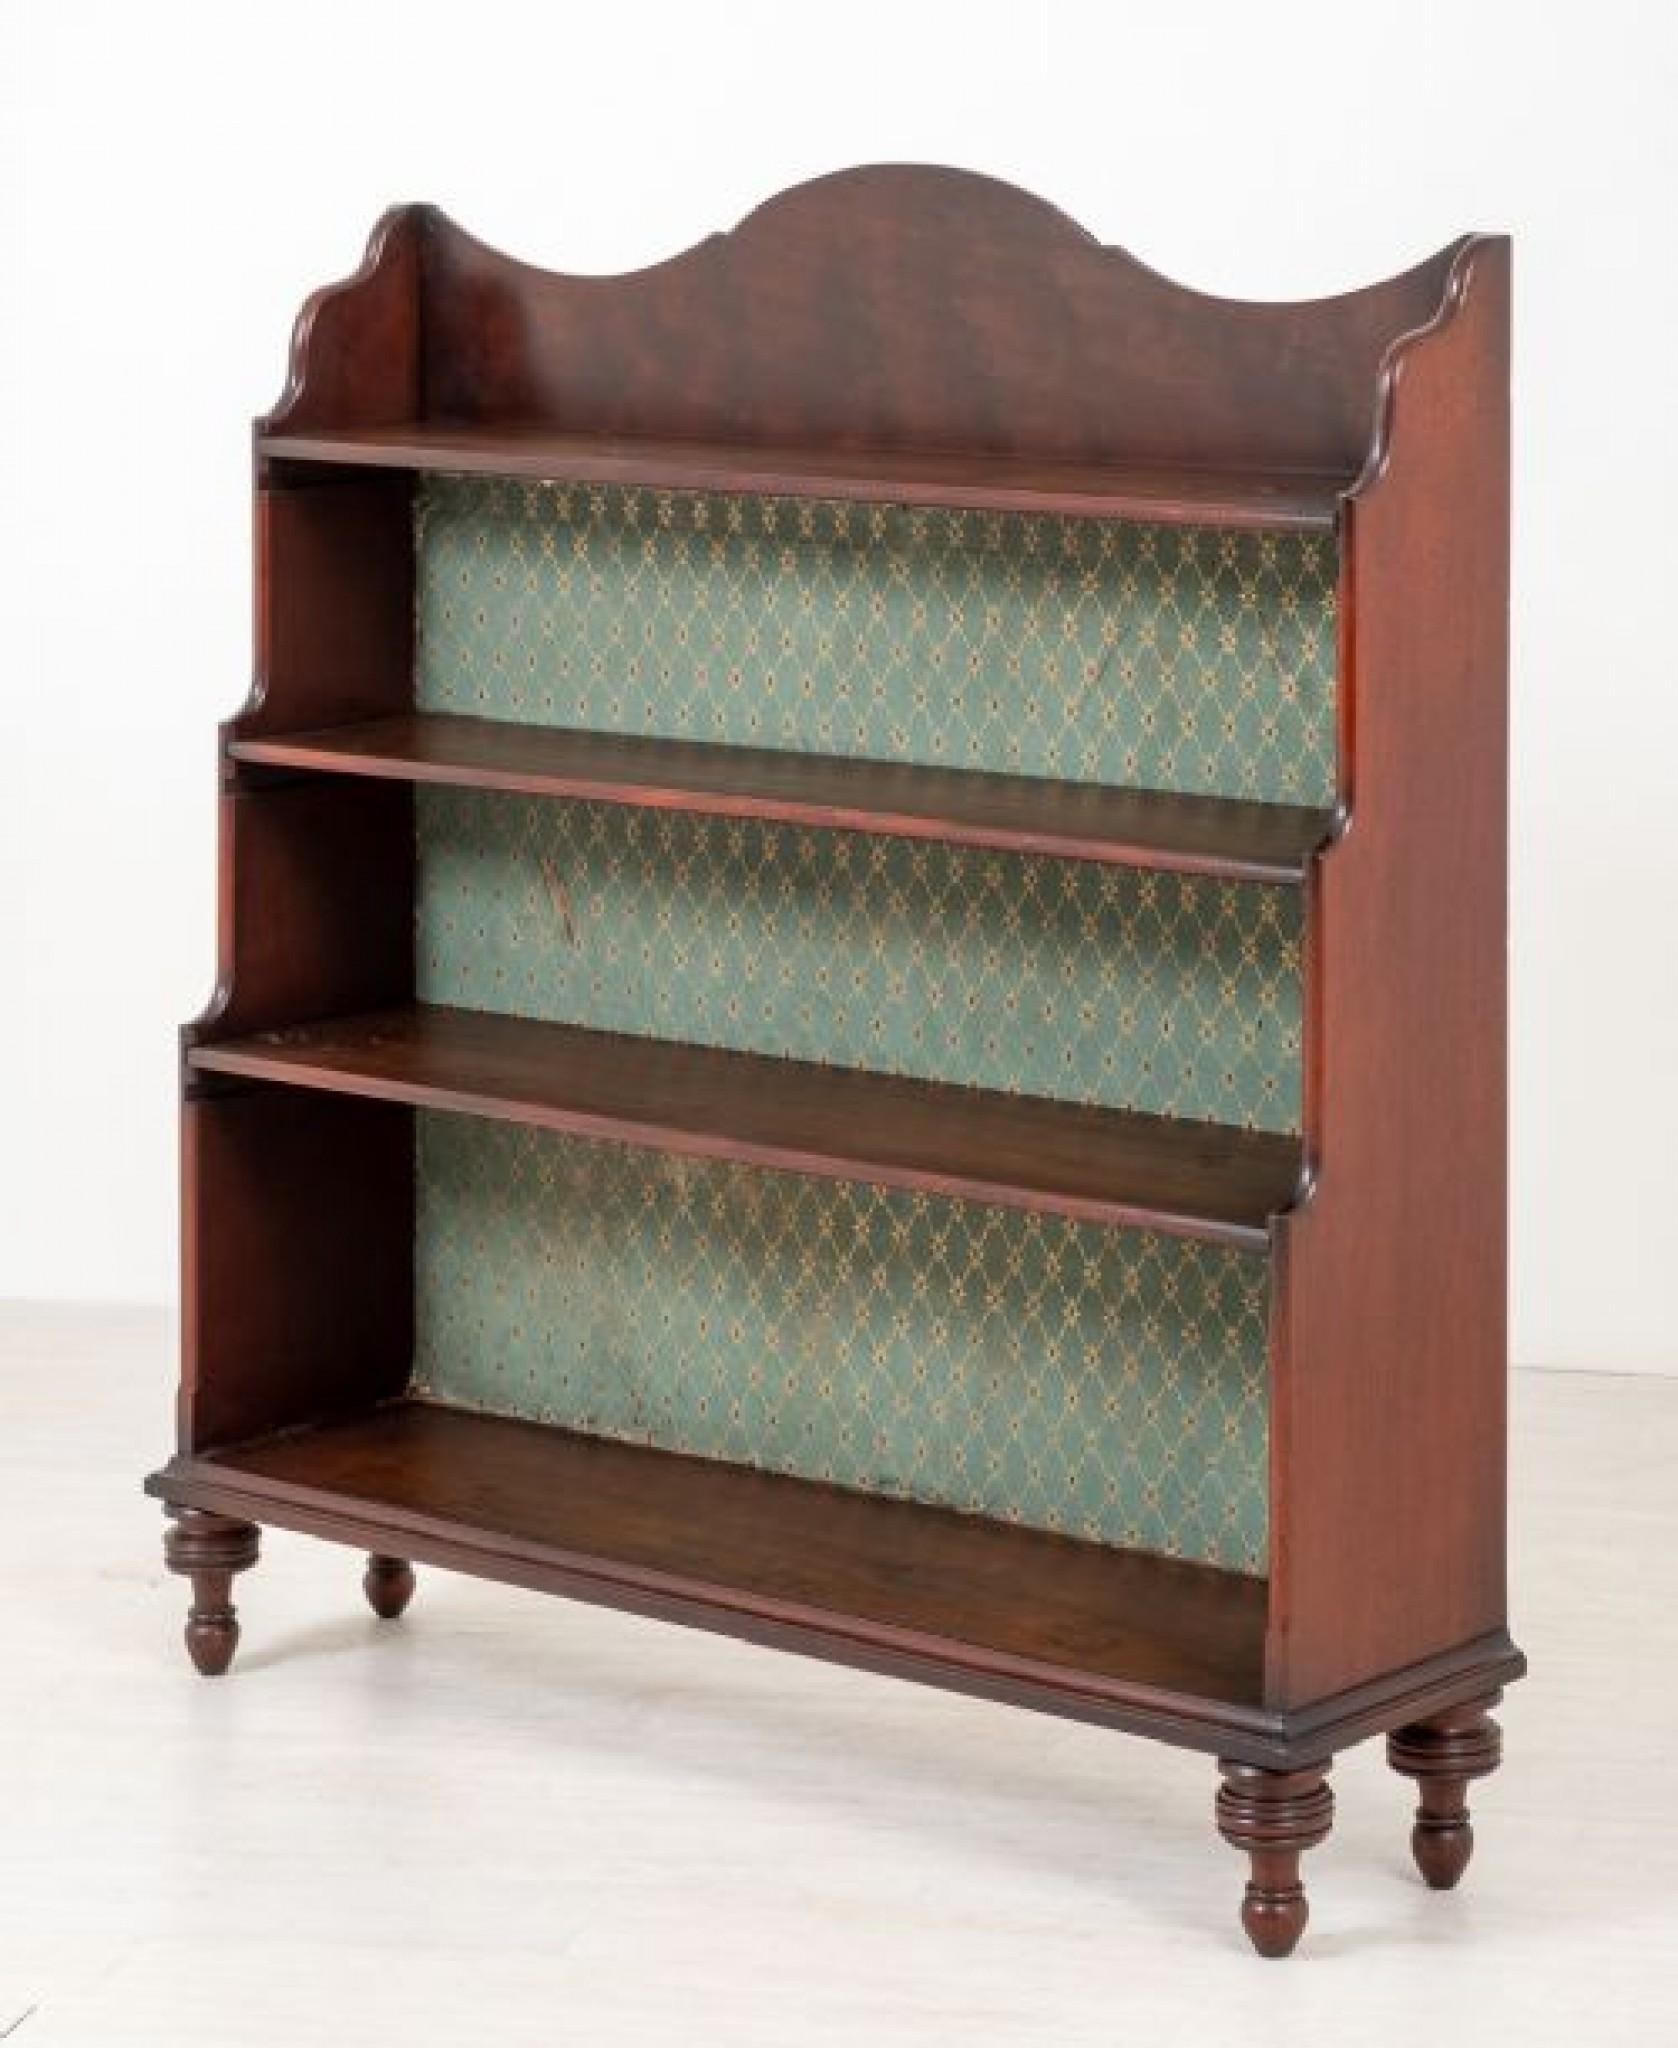 Mahogany Waterfall open Bookcase.
This Waterfall Bookcase is of a Typical Form.
Circa 1850
Featuring Ring Turned Feet, 3 Graduated Shelves and a Shaped Top.